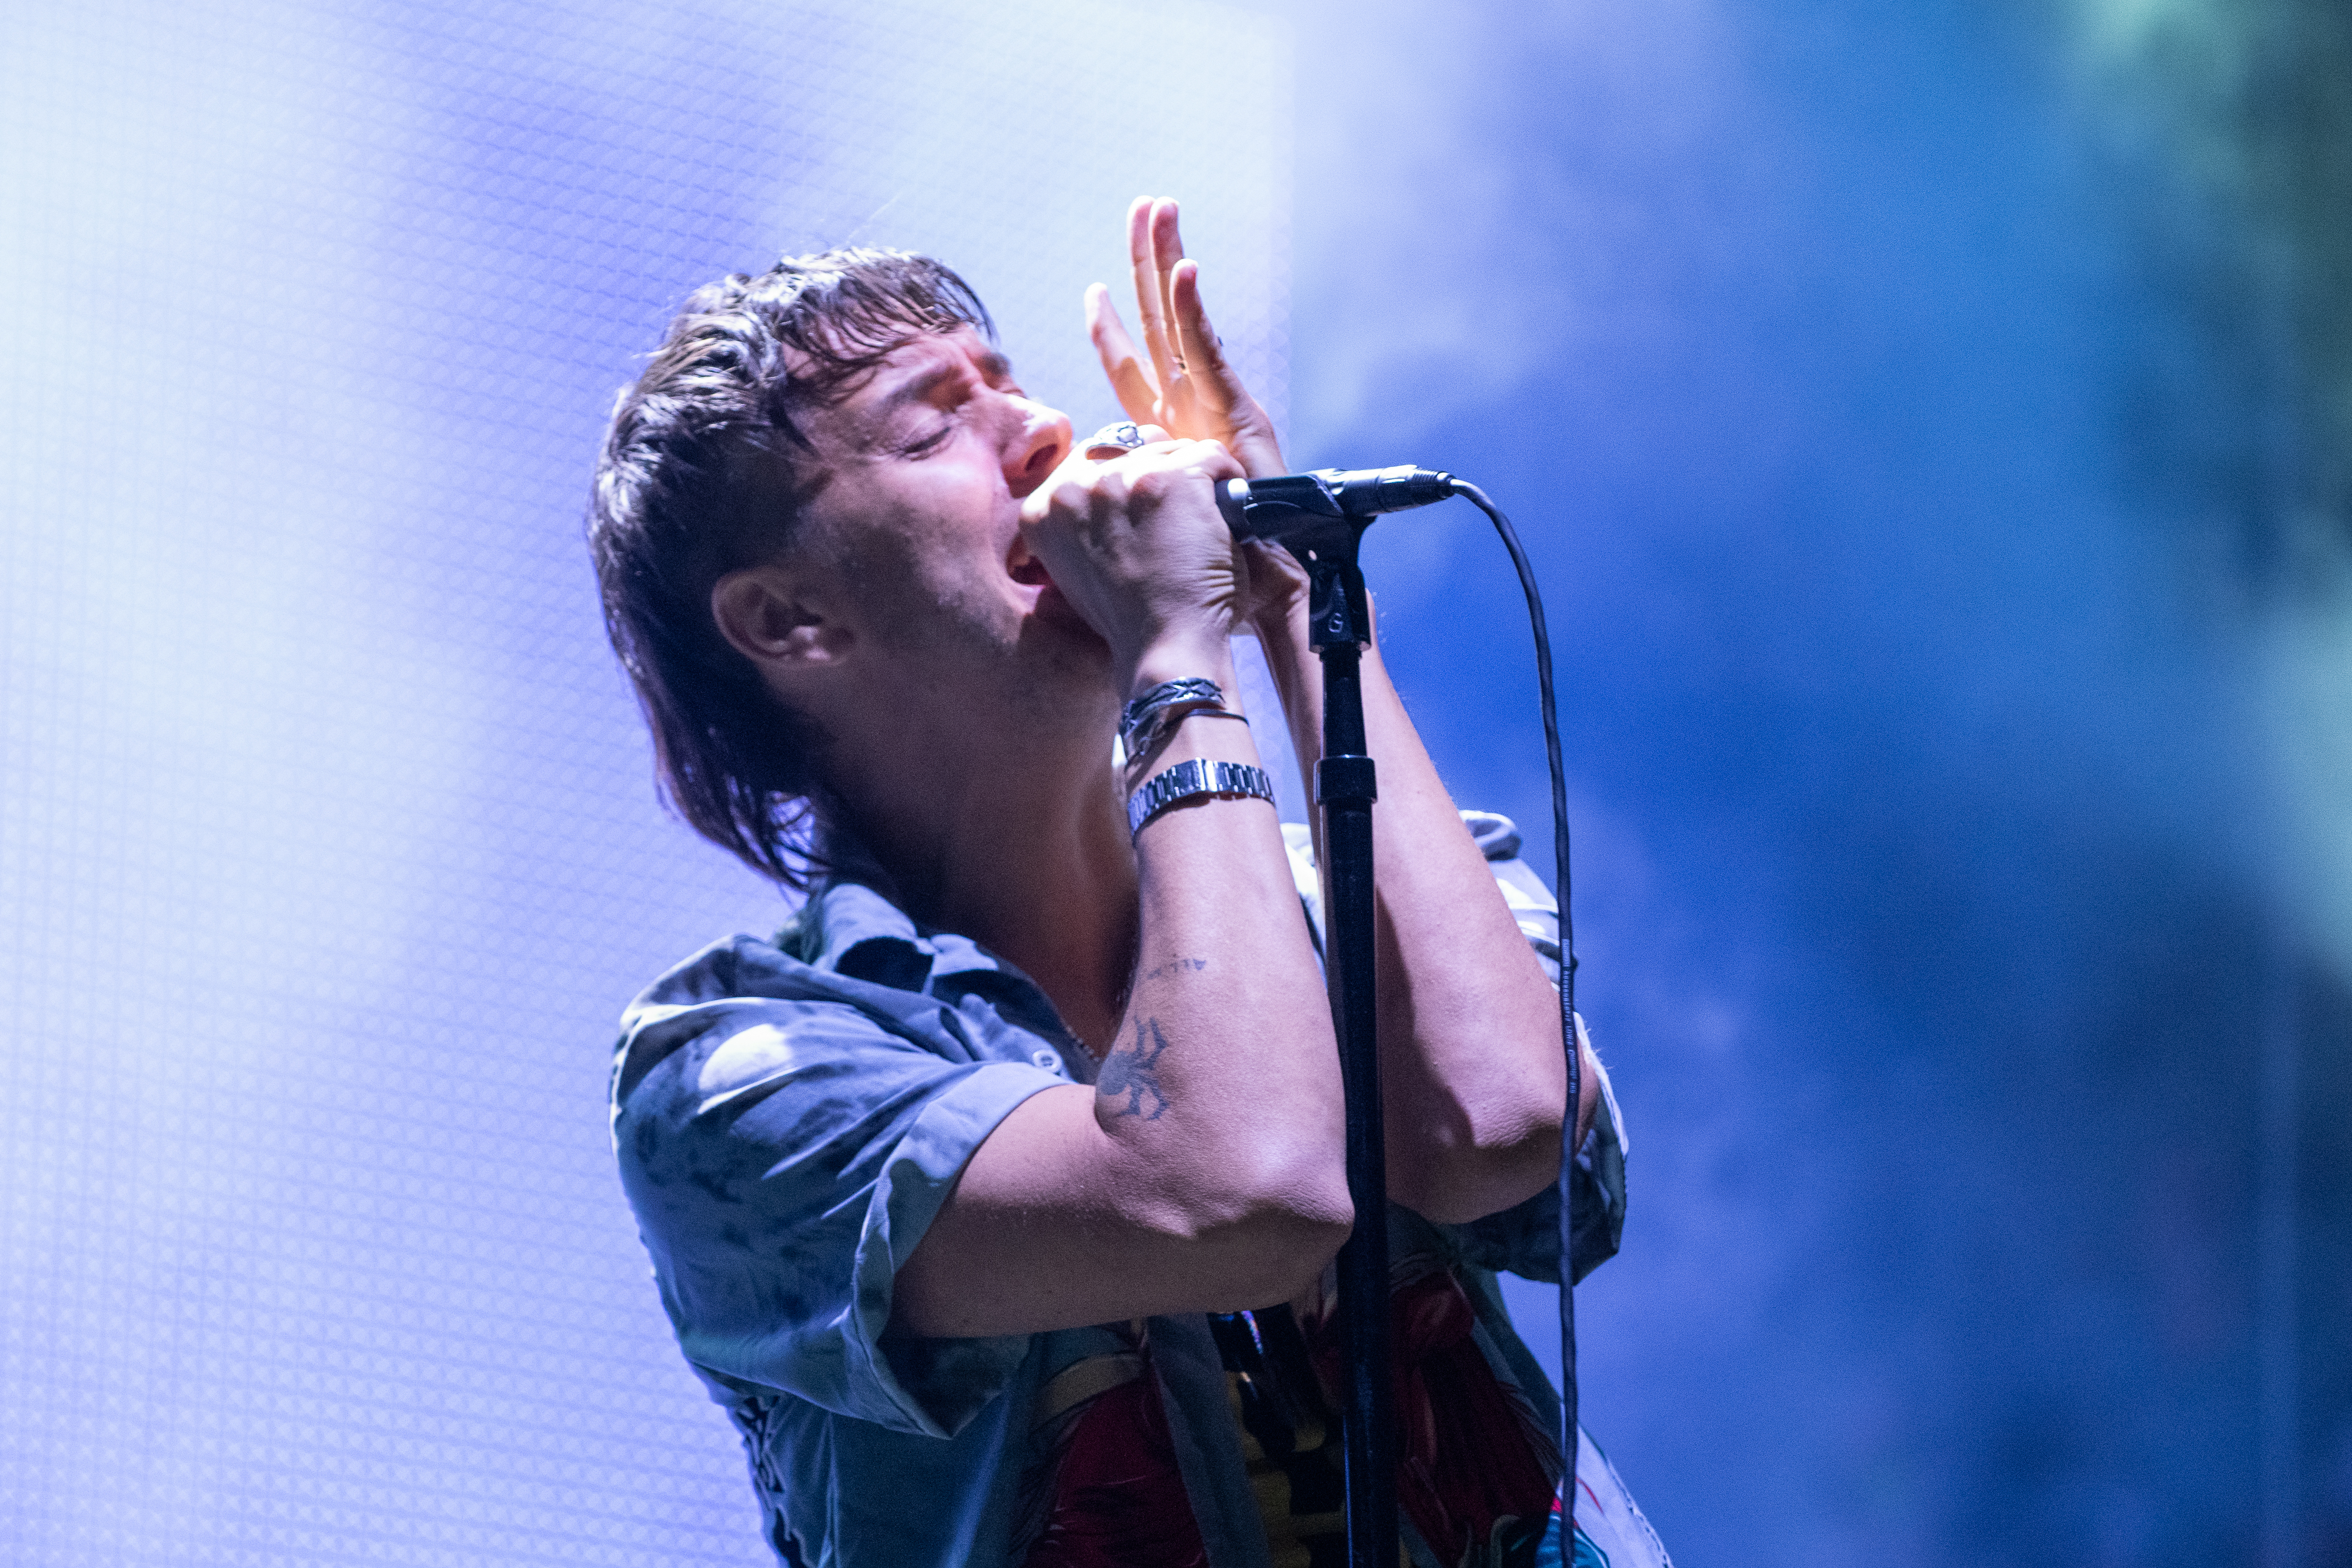 Lead vocalist Julian Casablancas of The Strokes performs live on stage duri...